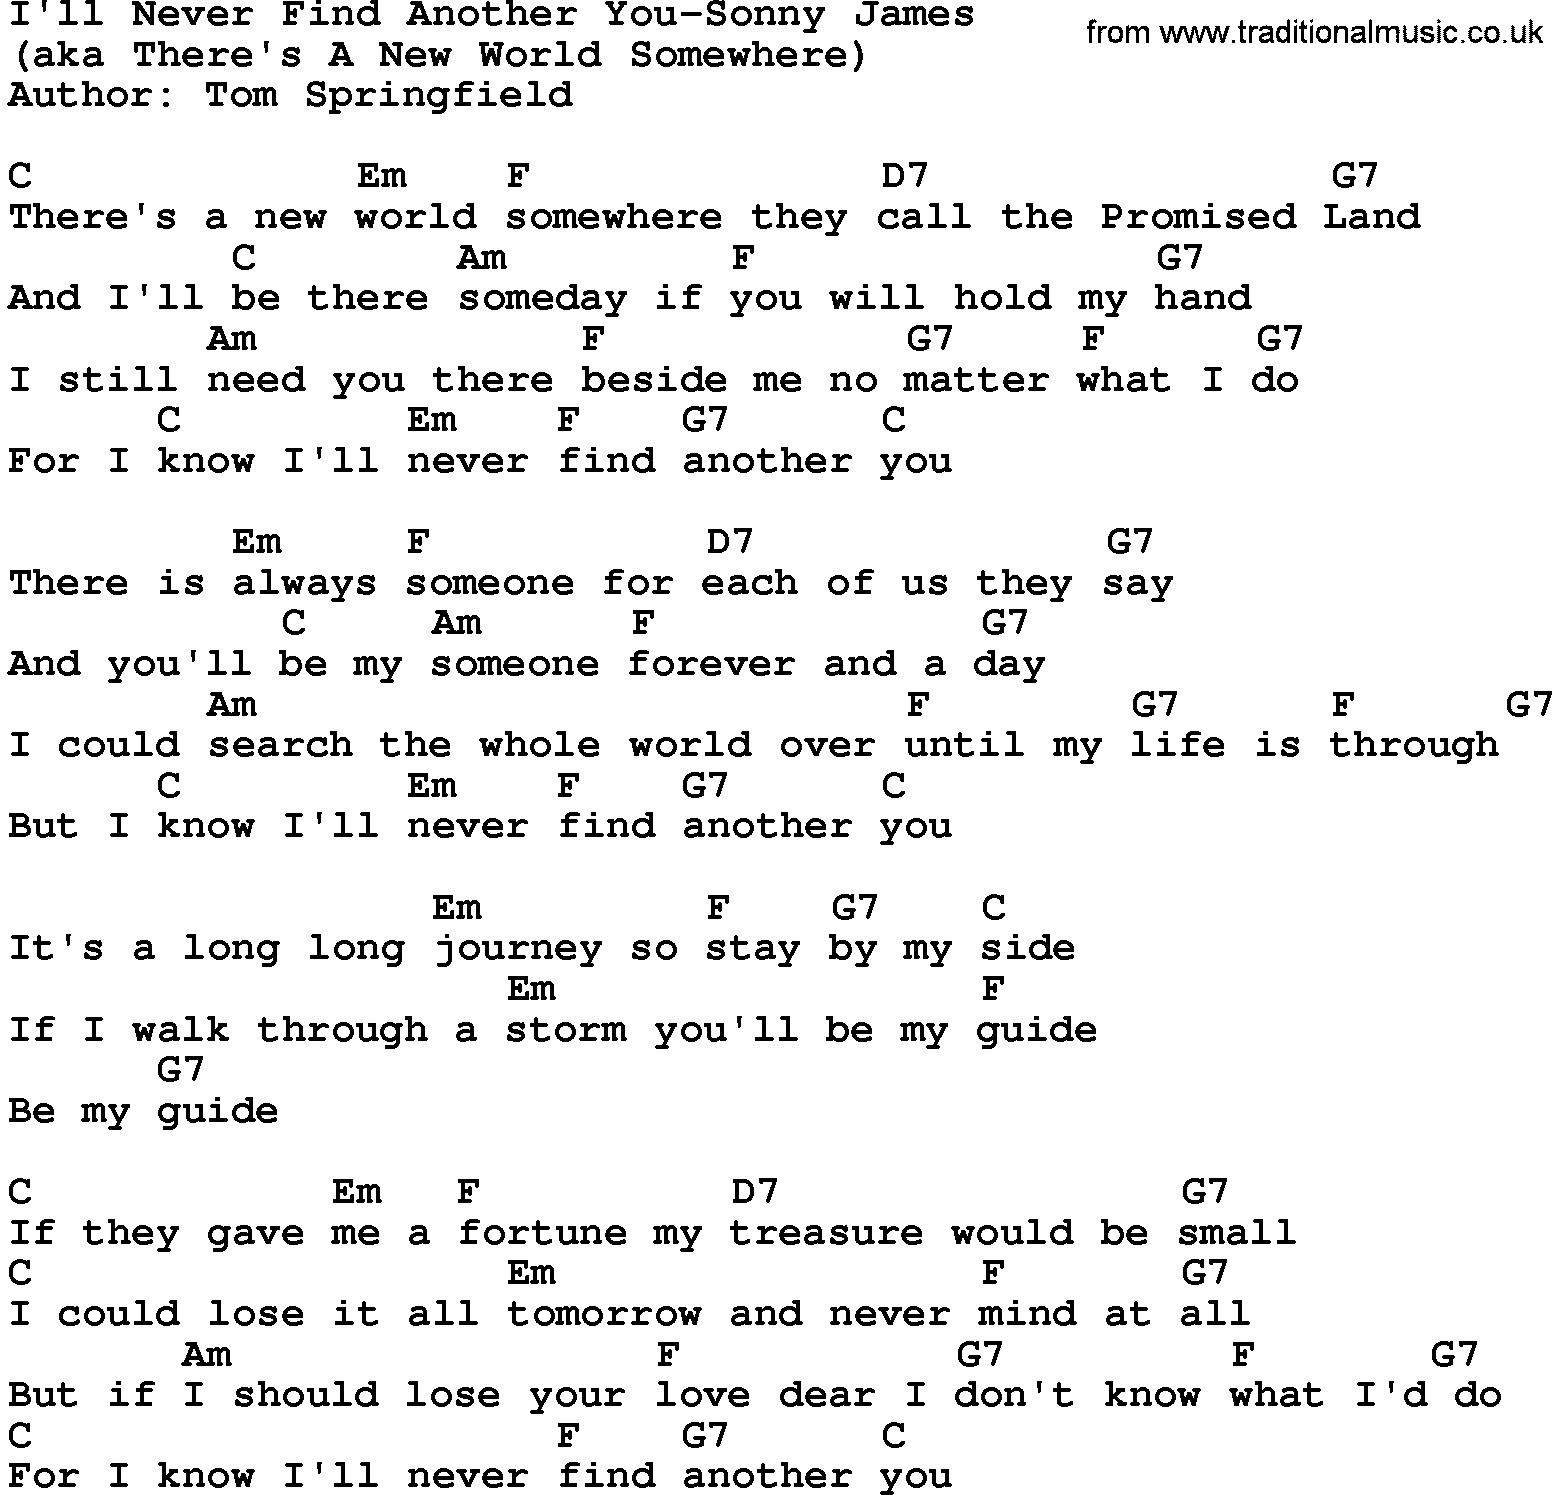 Country music song: I'll Never Find Another You-Sonny James lyrics and chords